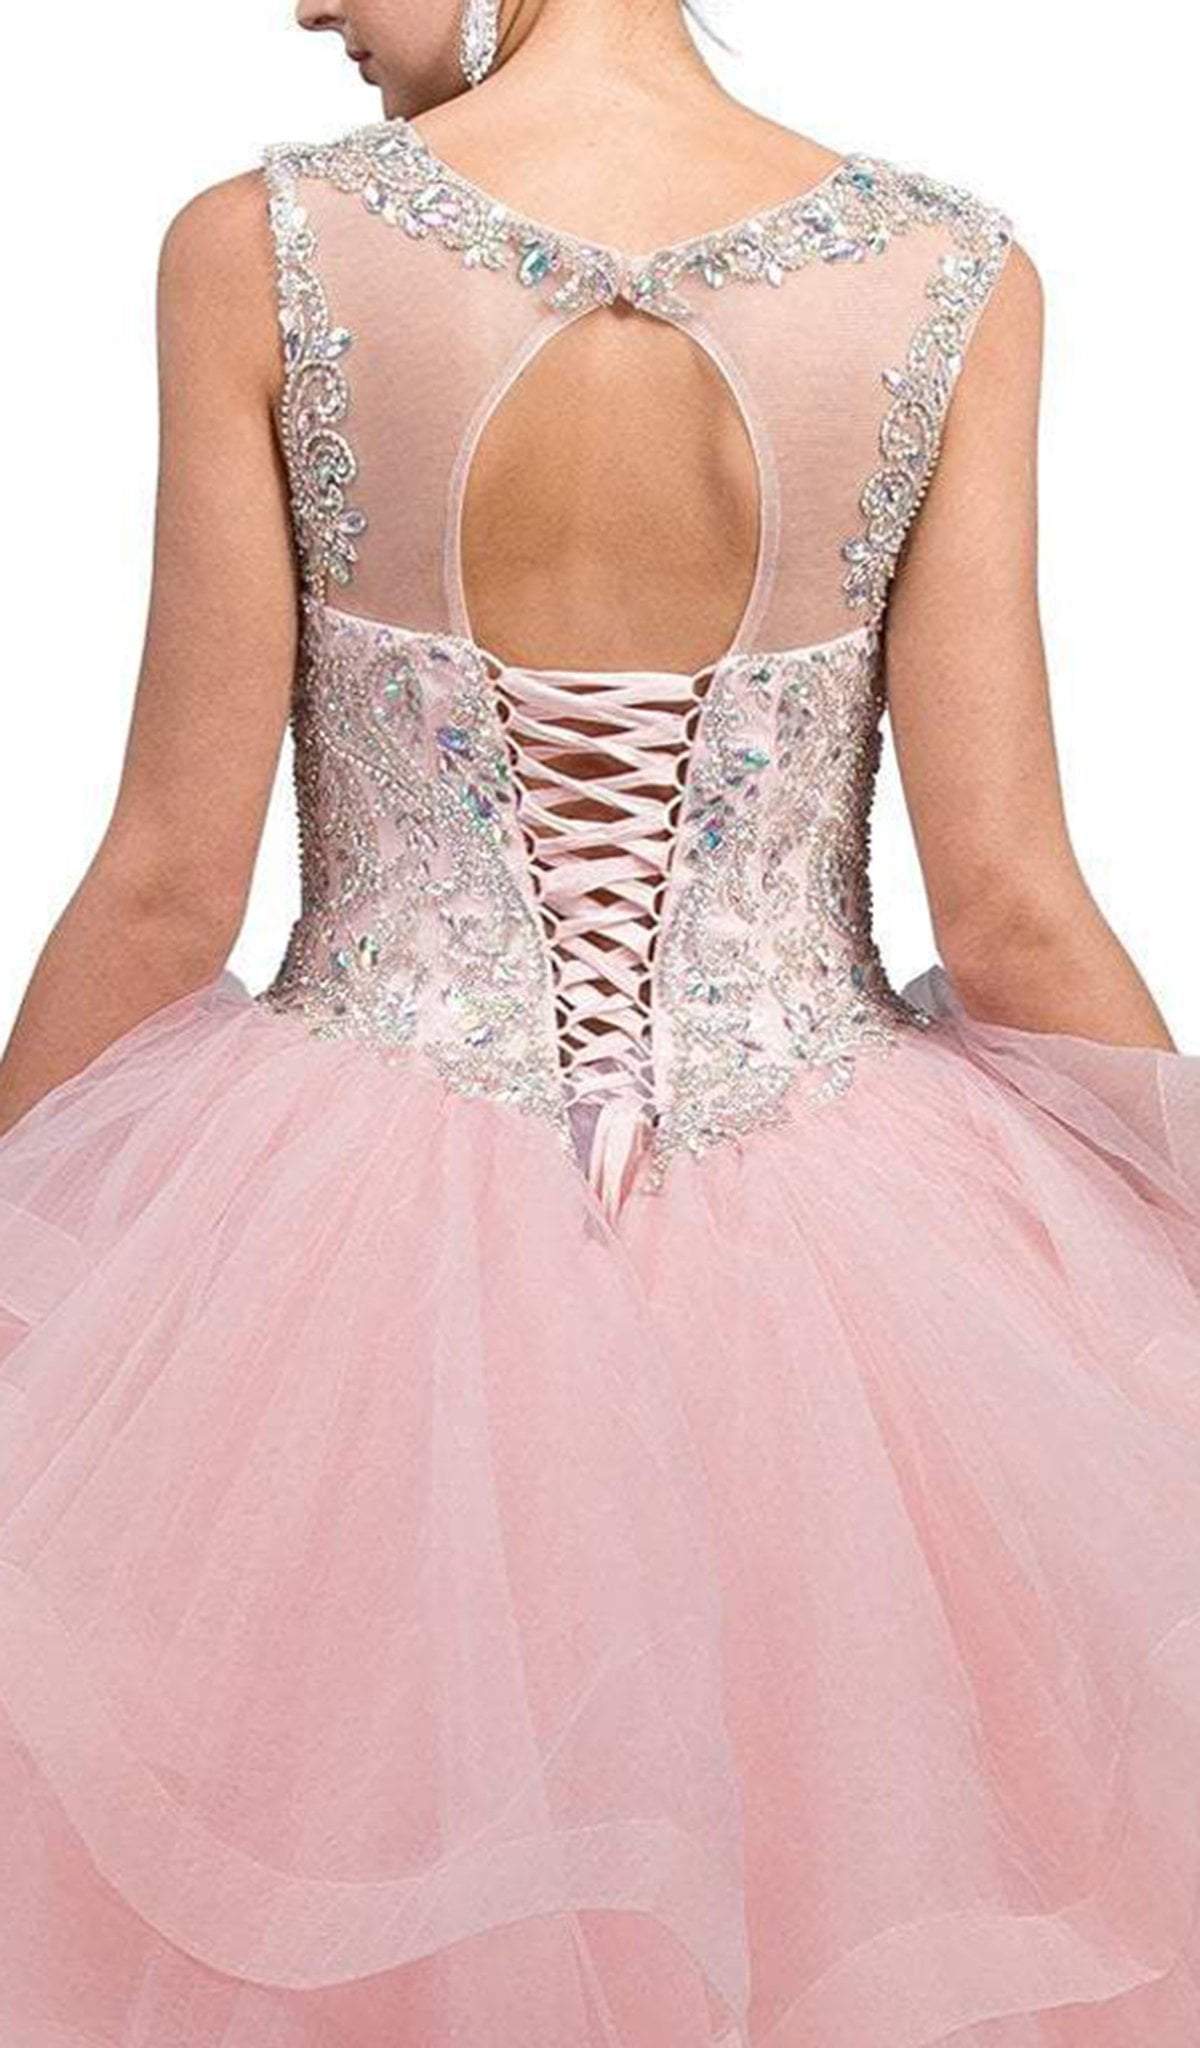 Dancing Queen - 1214 Crystal Embellished Ruffled Quinceanera Gown Special Occasion Dress